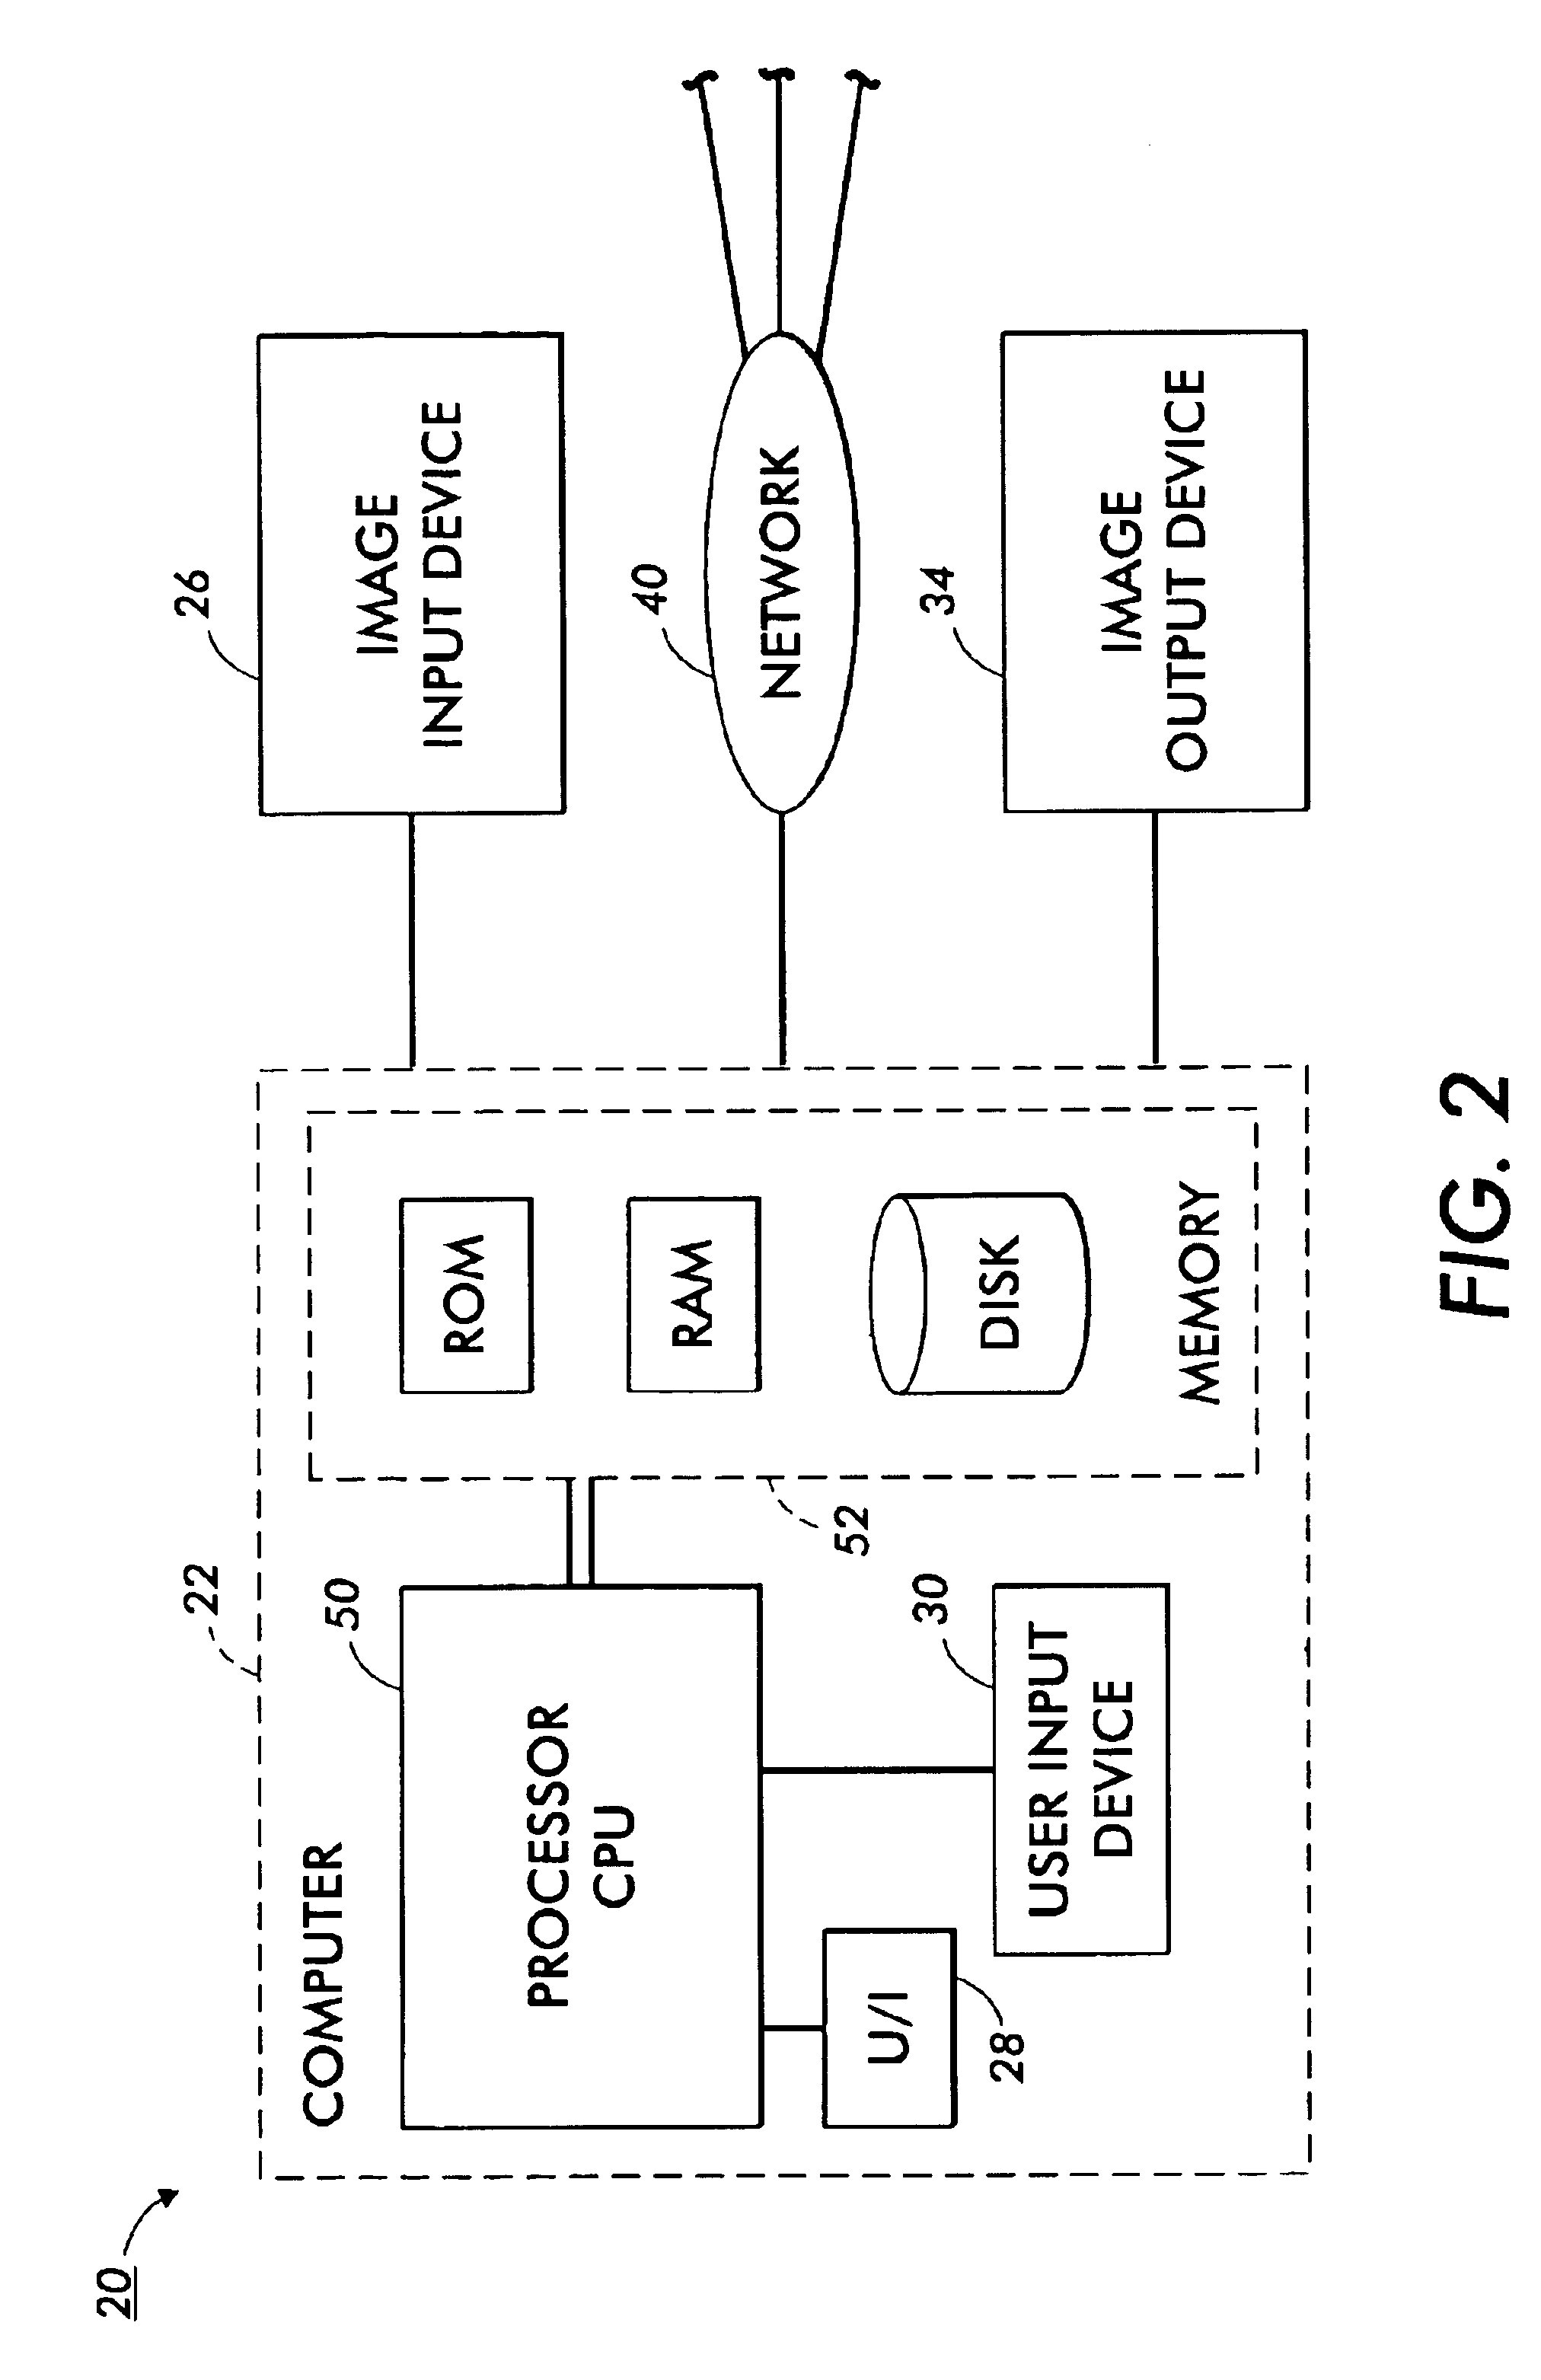 Detecting overlapping images in an automatic image segmentation device with the presence of severe bleeding